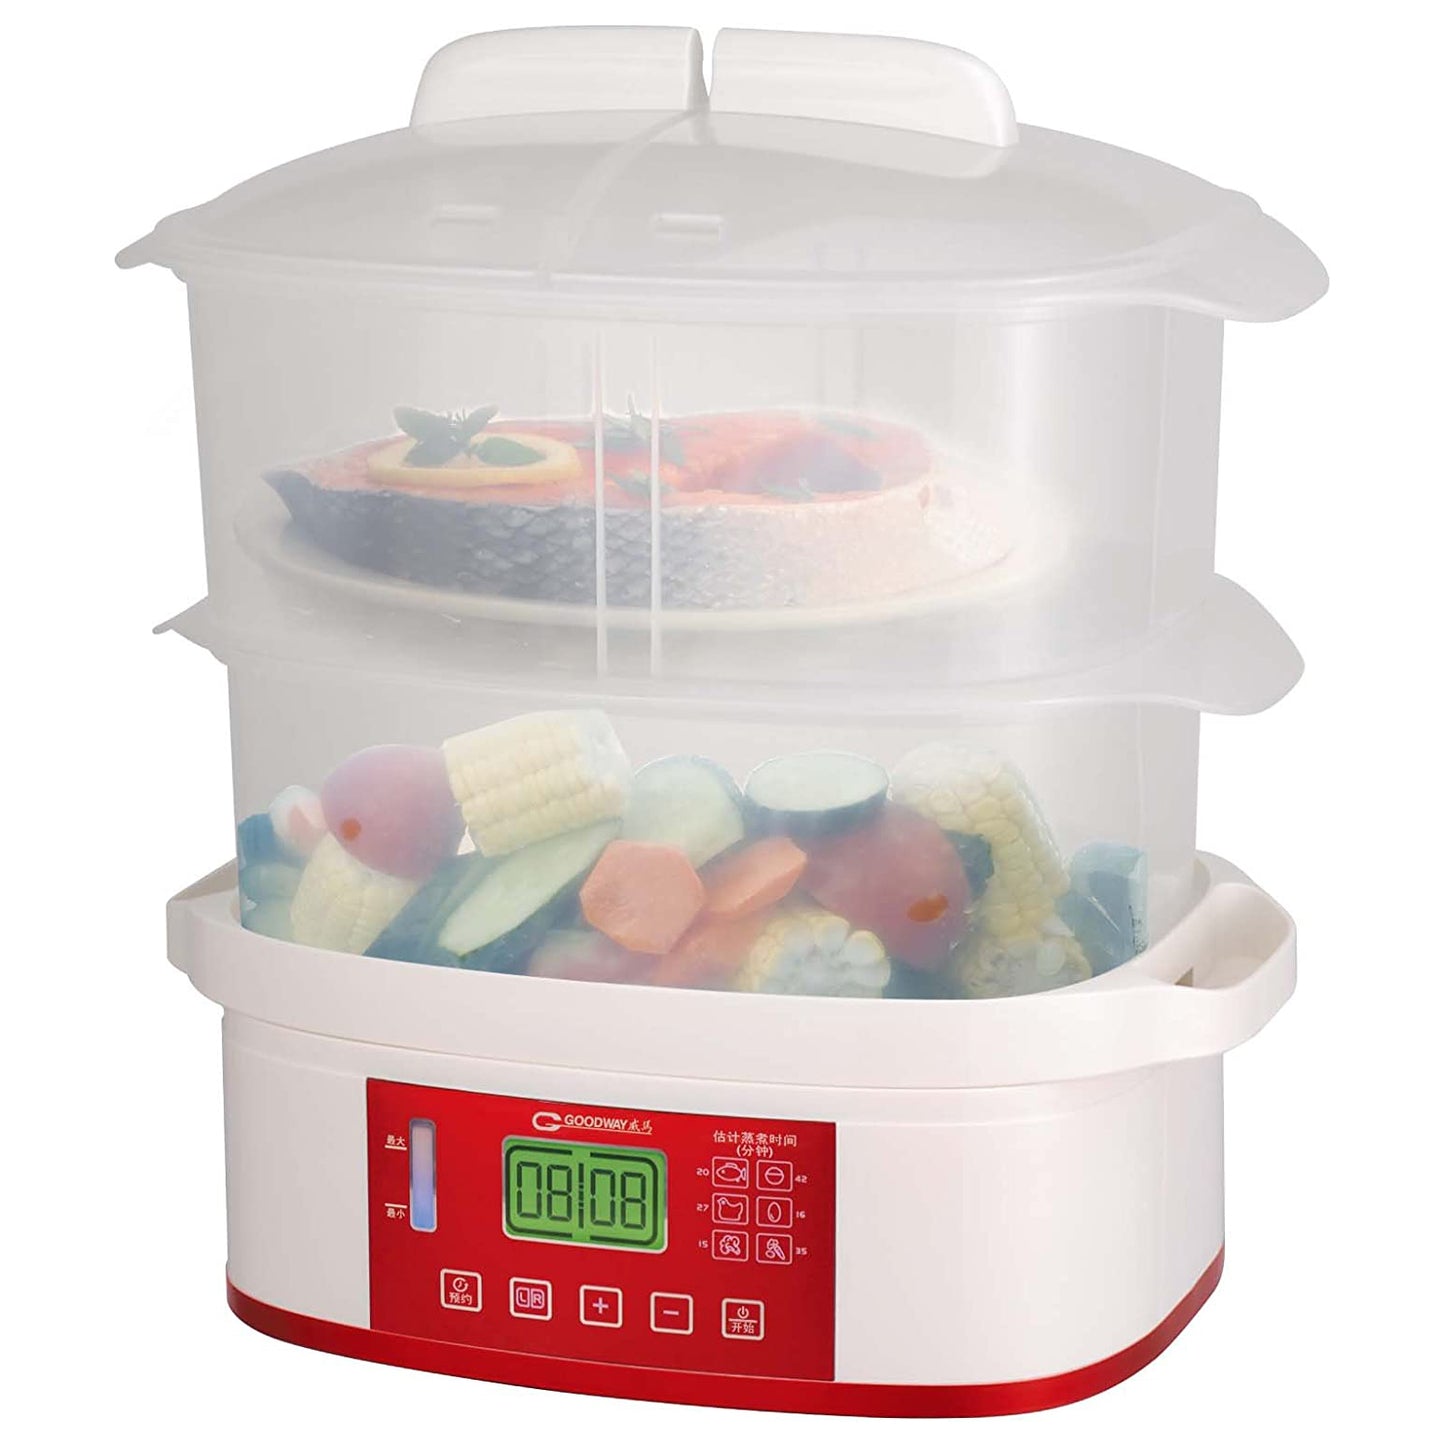 Goodway GF-350TA 750W Double Layer Multi-Purpose Food Steamer with 2 Tier Steam Basket, Twin Heating Coils, and 1.2 Liter Fluid Capacity for Home Cooking